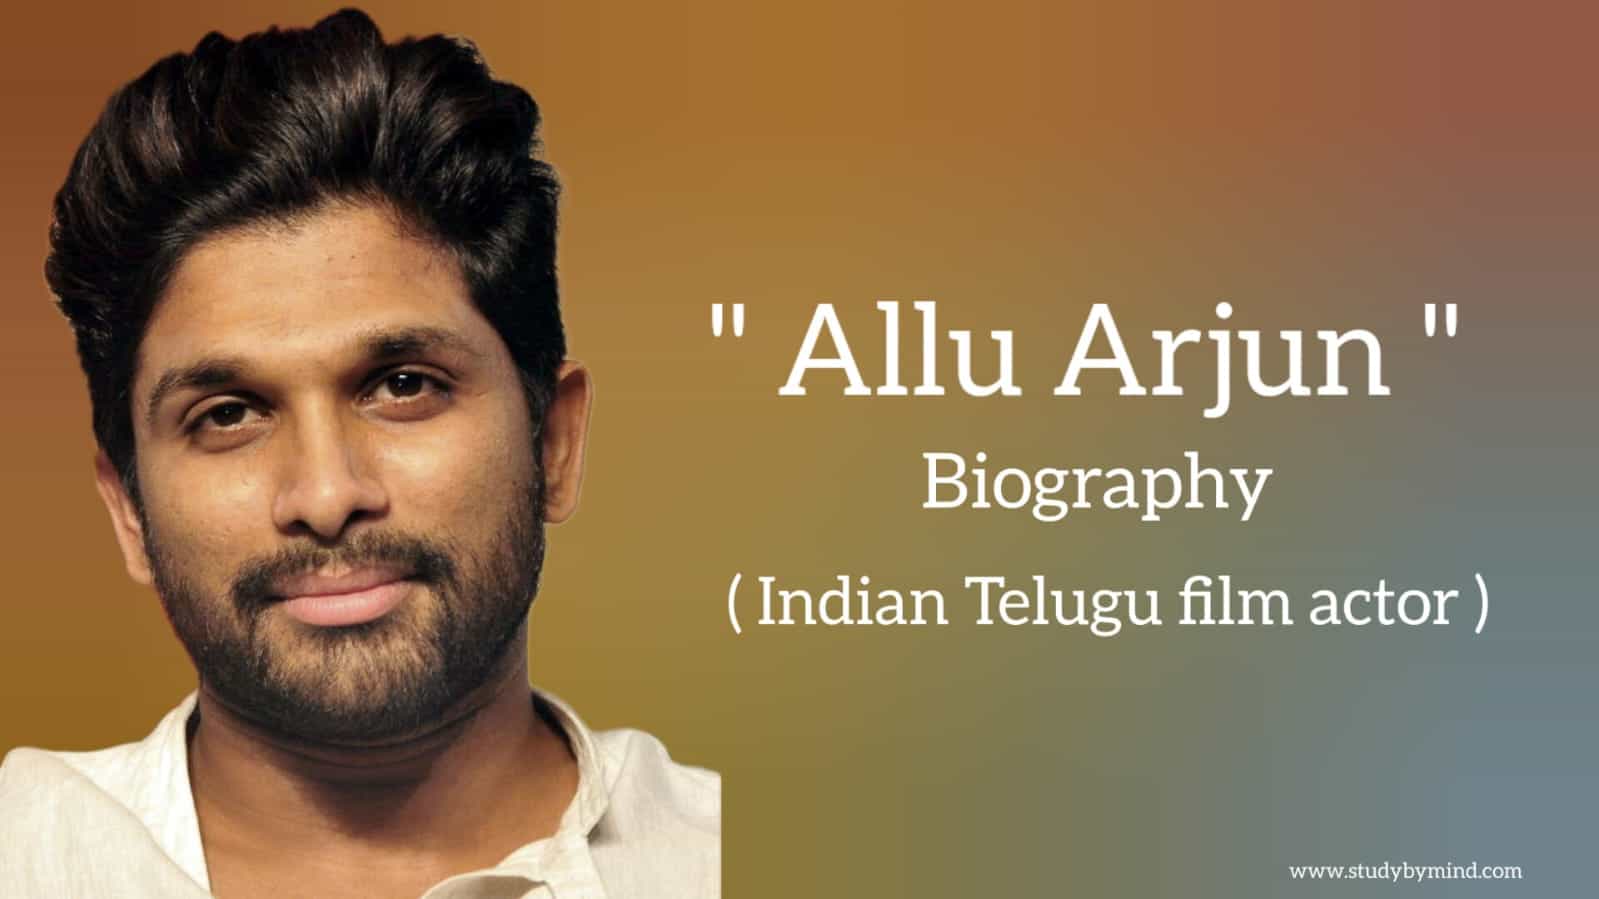 You are currently viewing Allu arjun biography in english (Indian Telugu Film Actor), Age, Movie, wife name, net worth